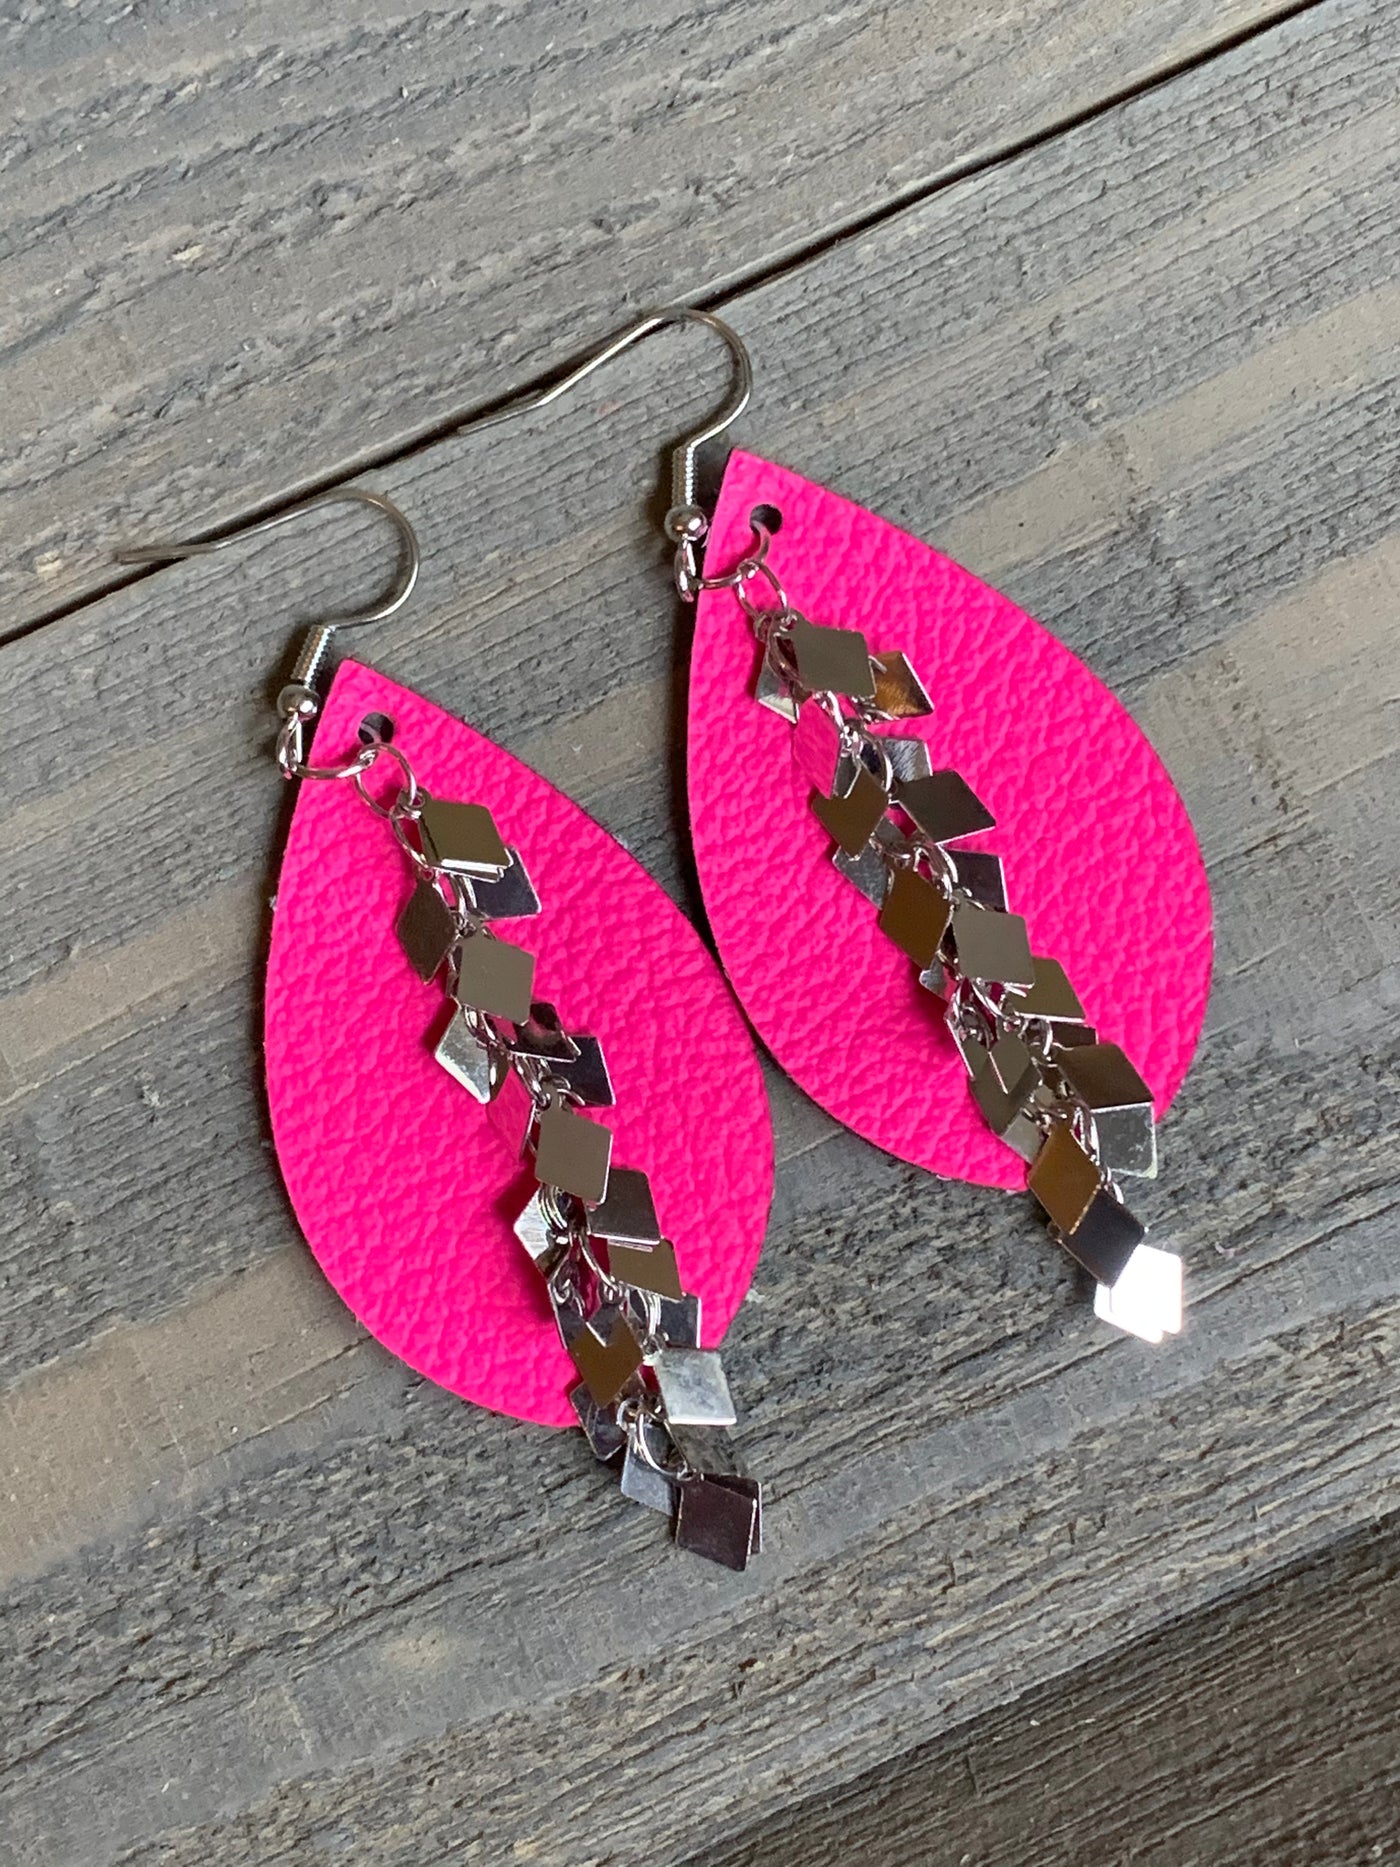 Neon Pink Leather Earrings with Silver Diamond Chain - Jill's Jewels | Unique, Handcrafted, Trendy, And Fun Jewelry